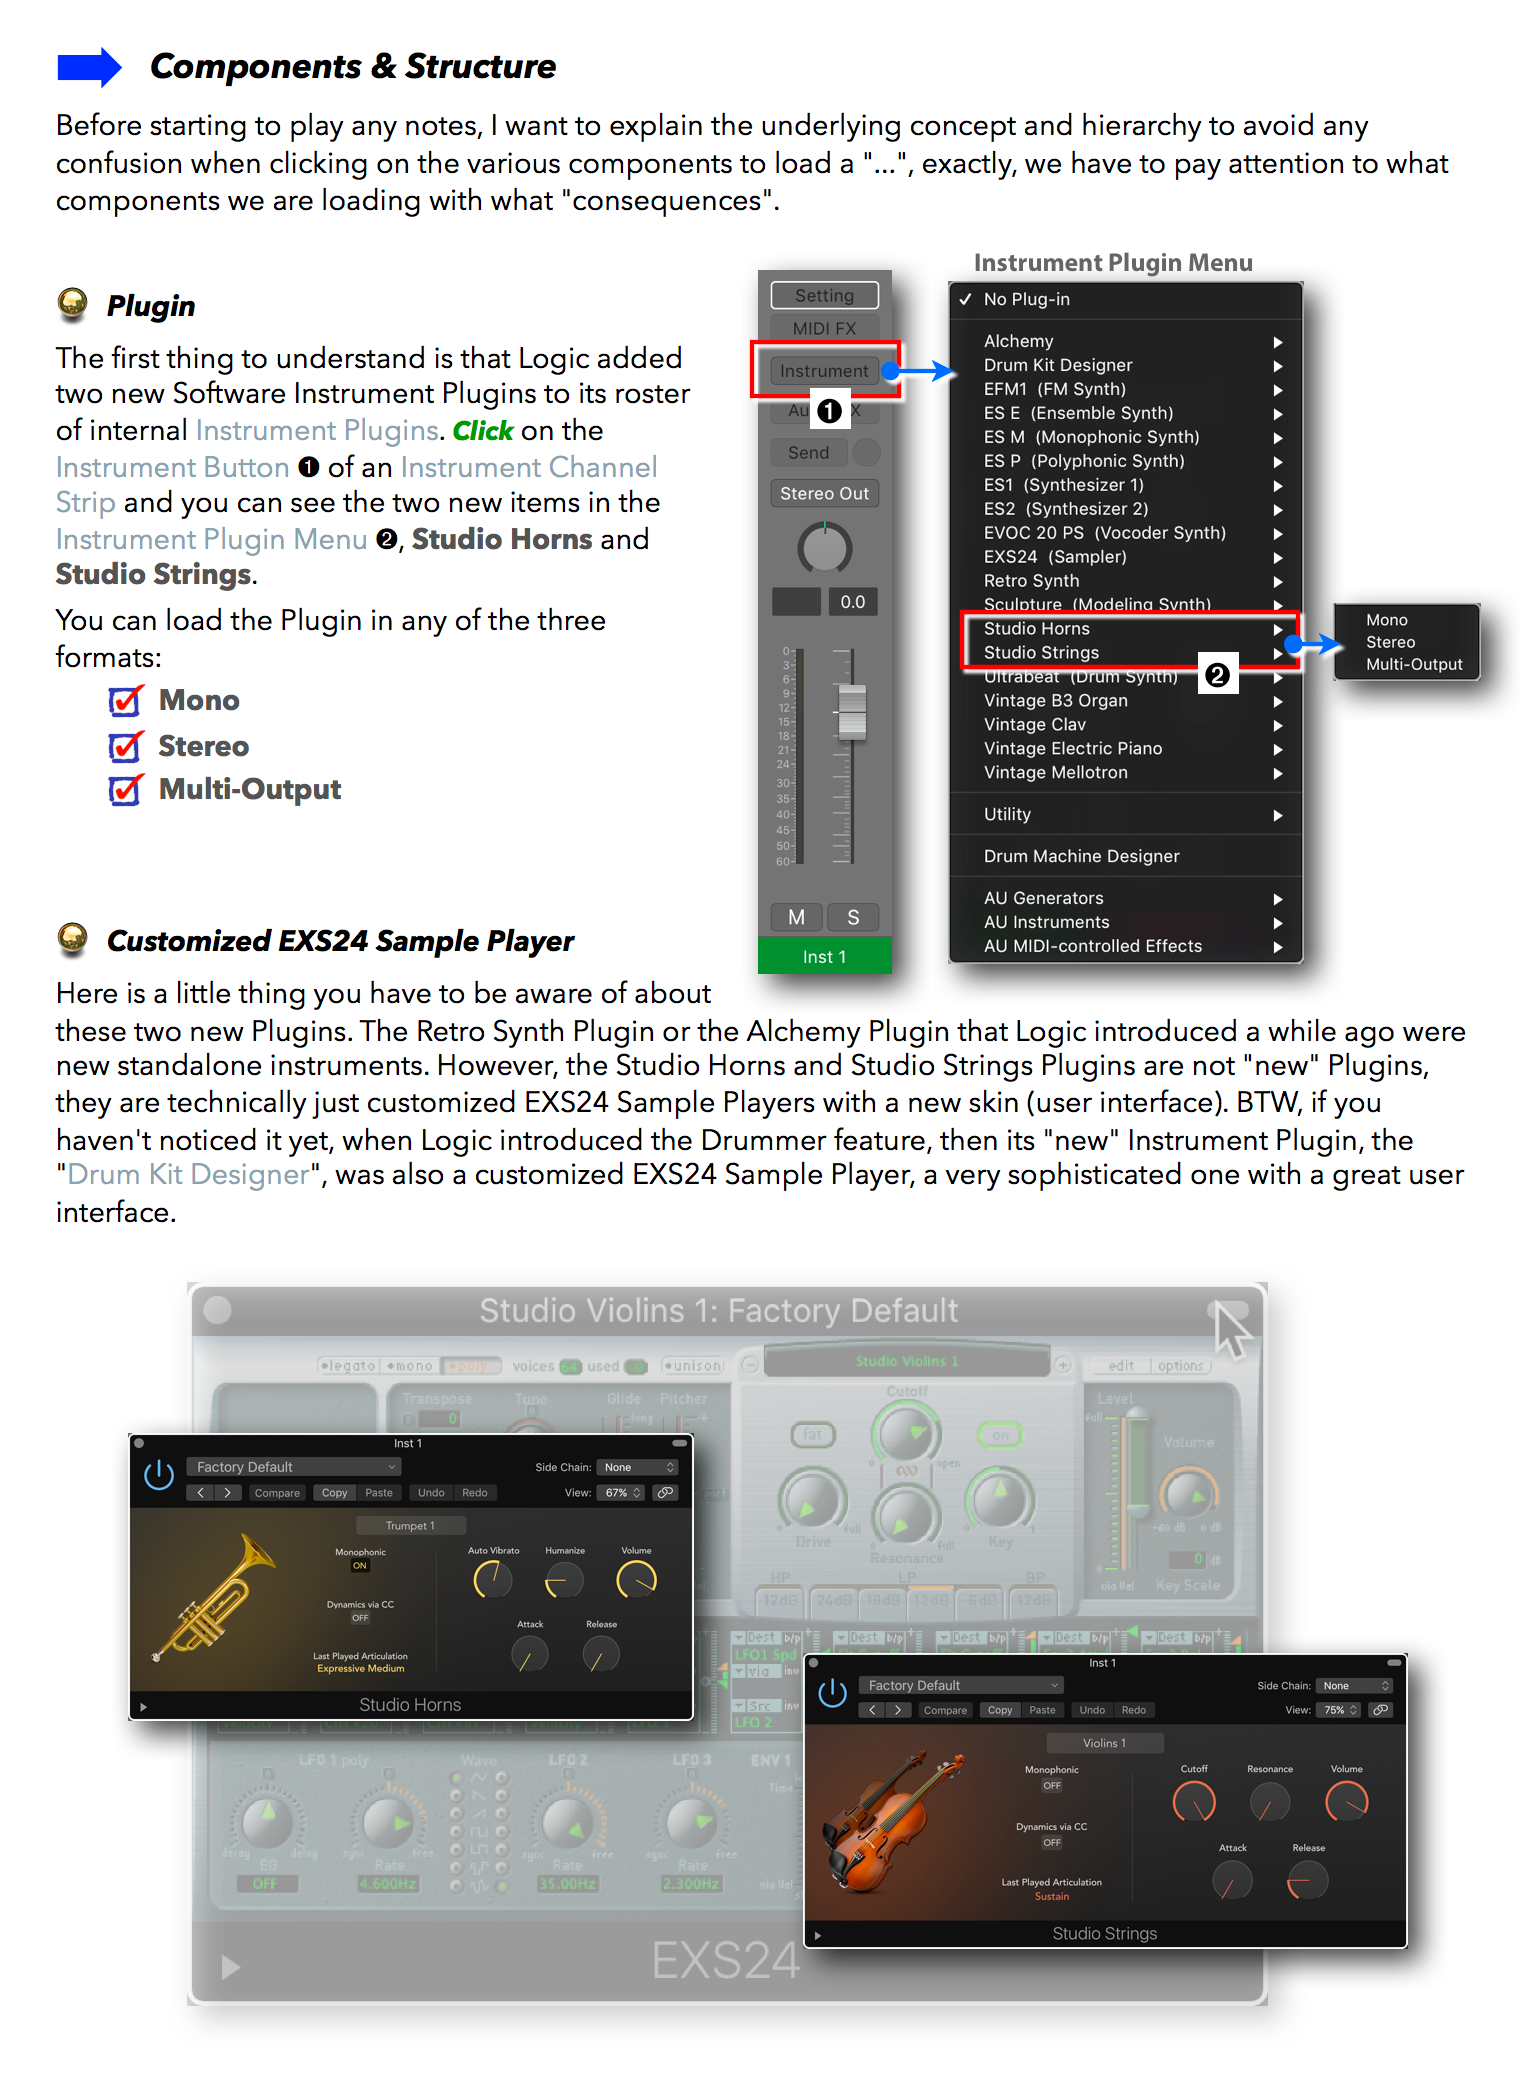 logic pro x whats new in 10.4 download